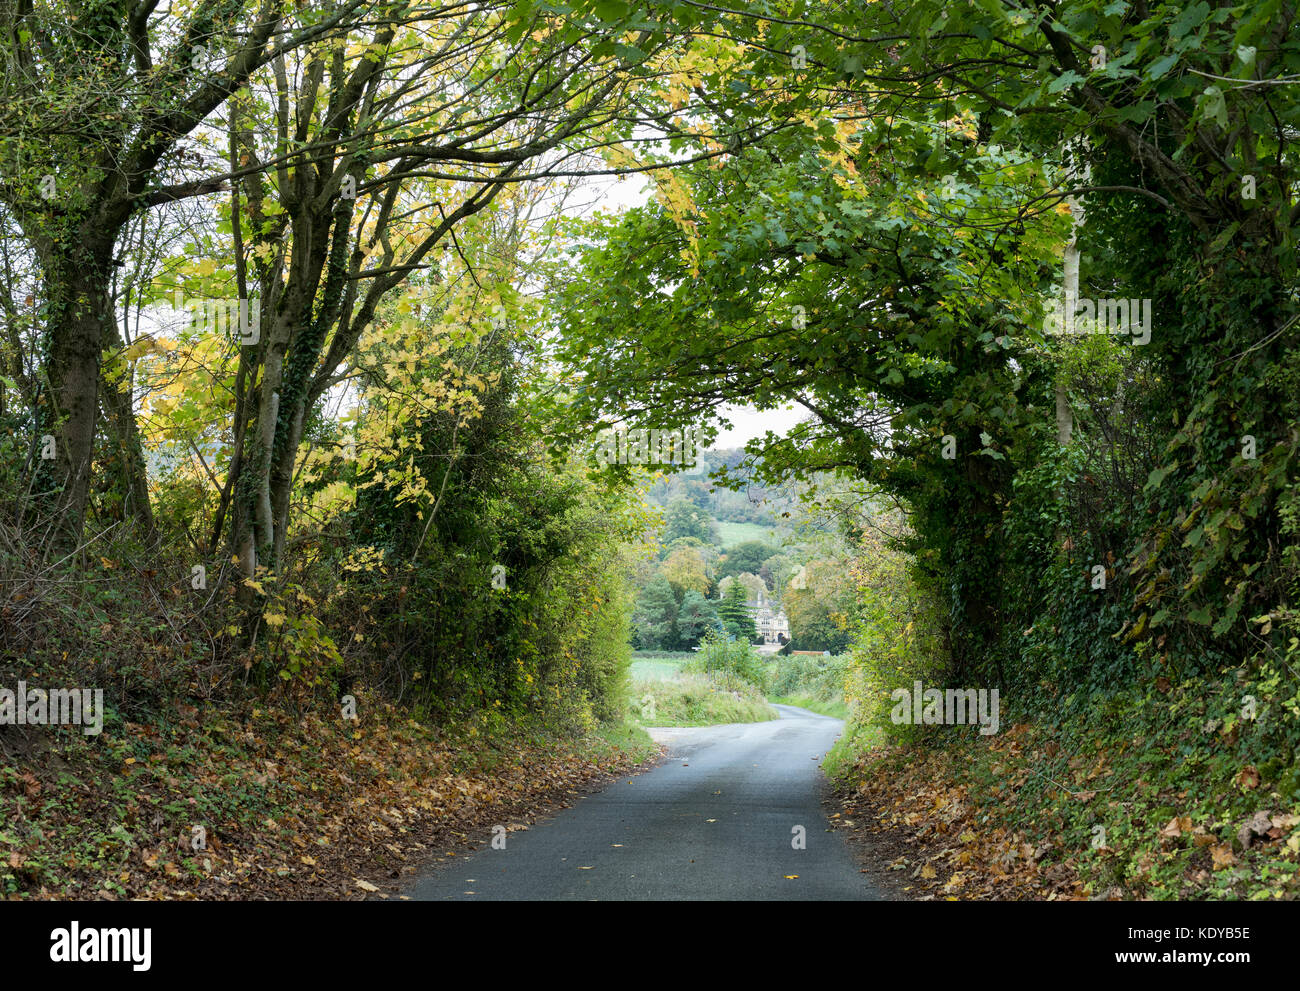 Tunnel of trees in autumn looking towards Upper Slaughter Manor. Upper Slaughter. Cotswolds, Gloucestershire, England Stock Photo